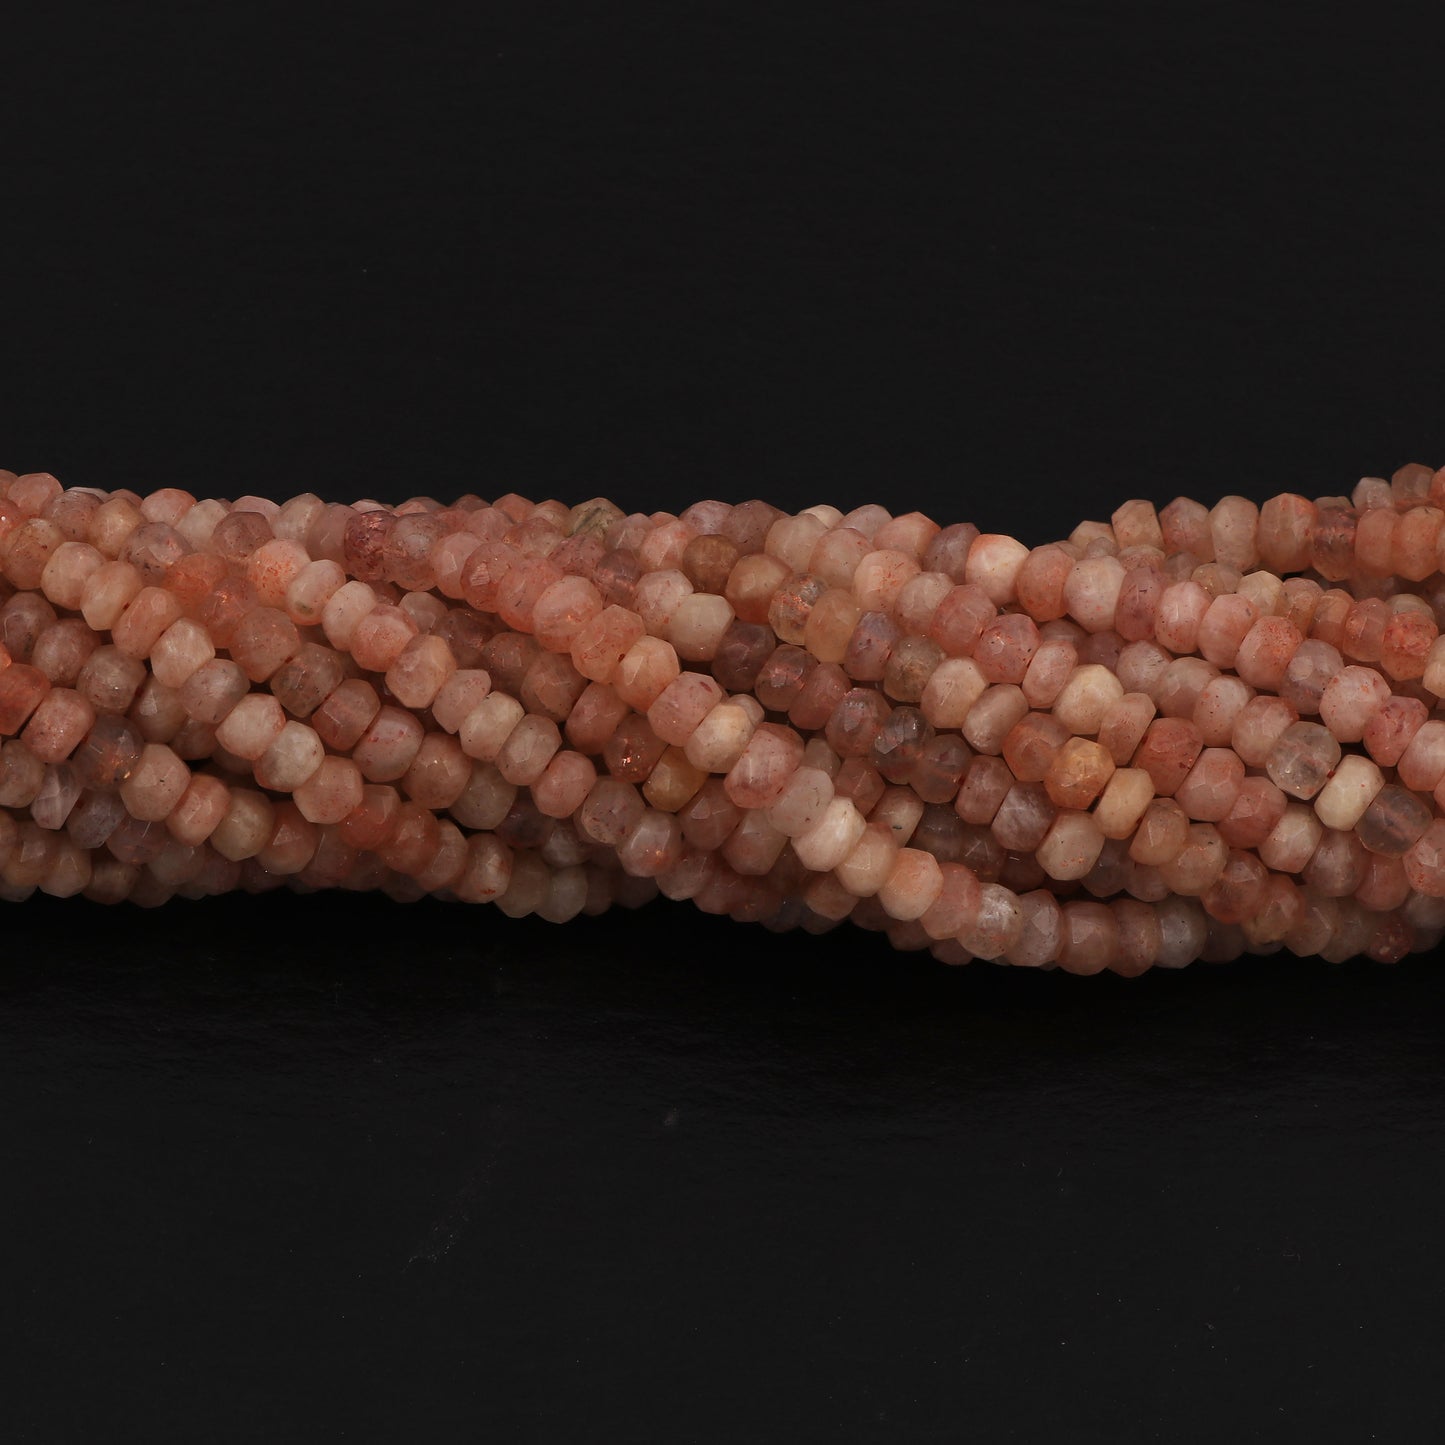 Natural Peach Moonstone Gemstone Rondelle Faceted Beads Strand 13 Inches